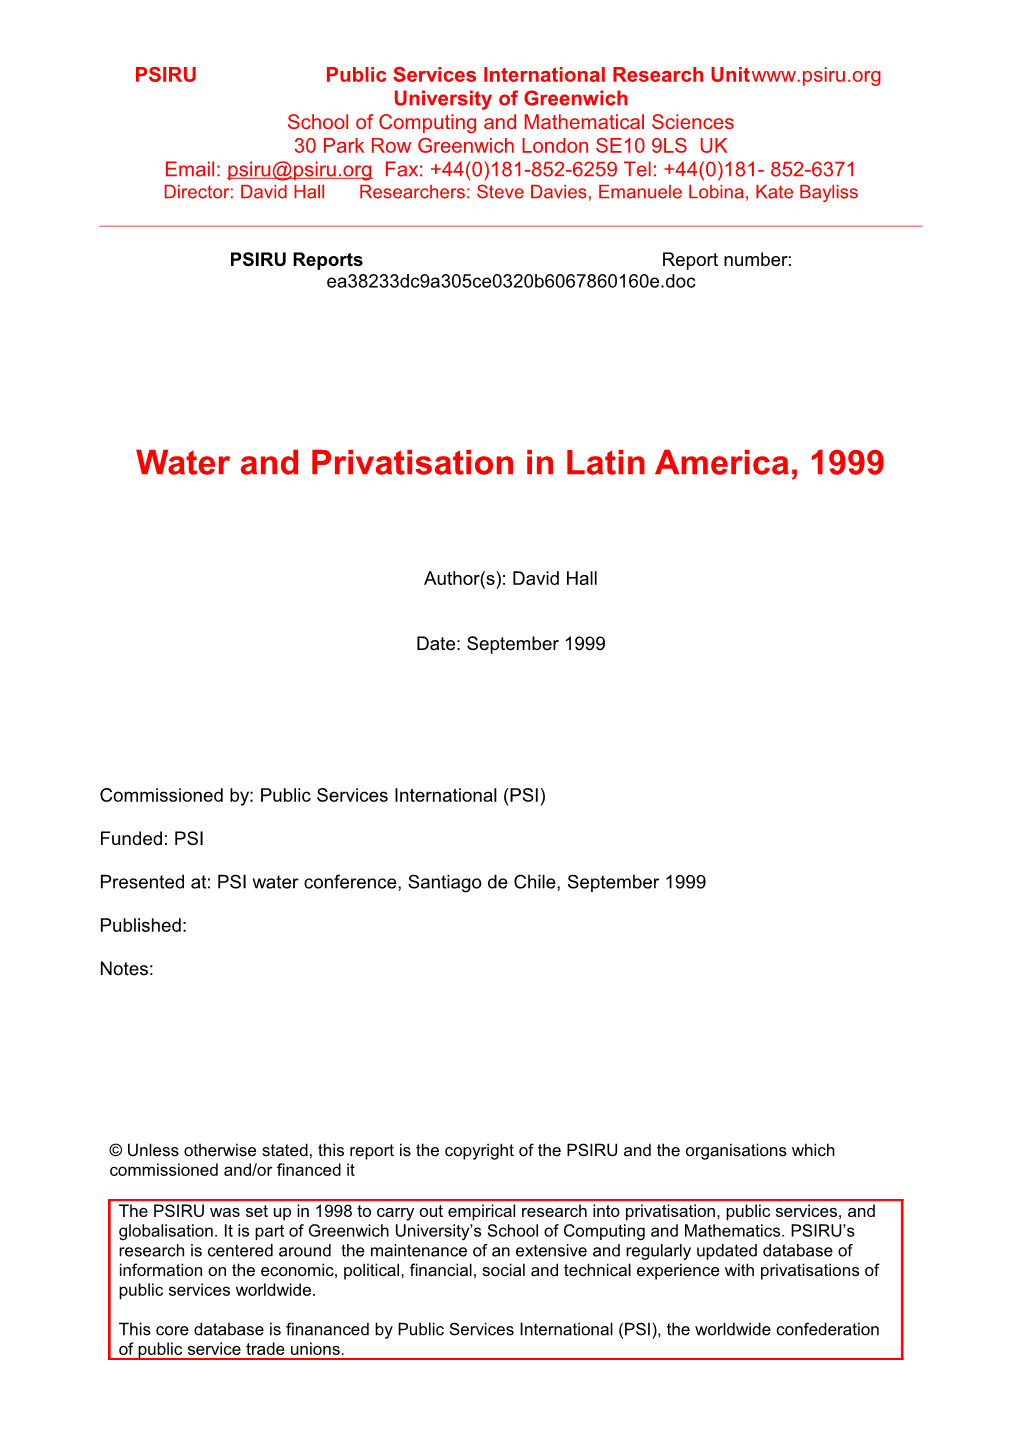 Water and Privatisation in Latin America, 1999